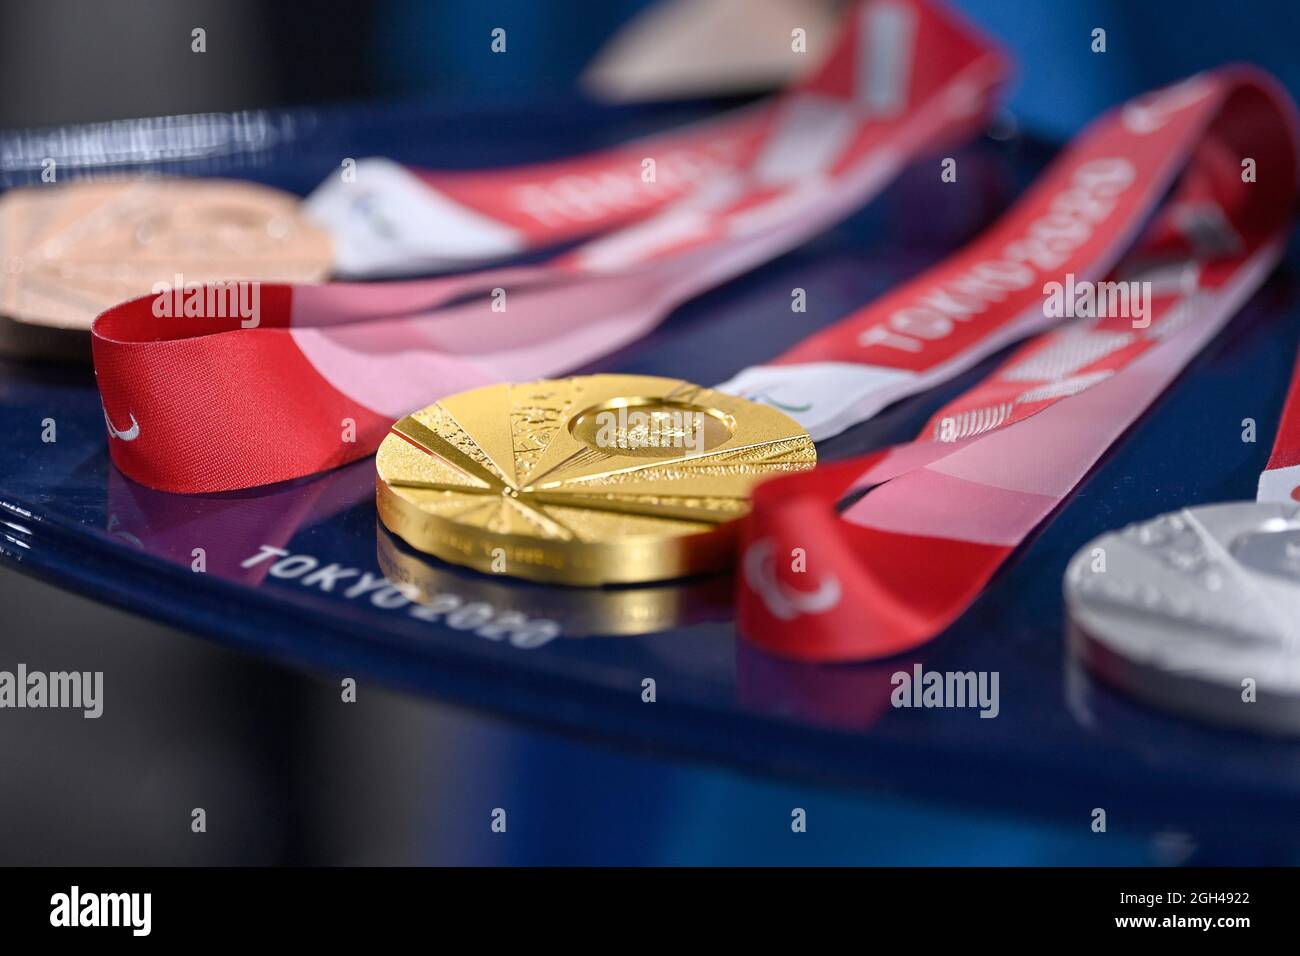 Paralympic Medals High Resolution Stock Photography and Images - Alamy